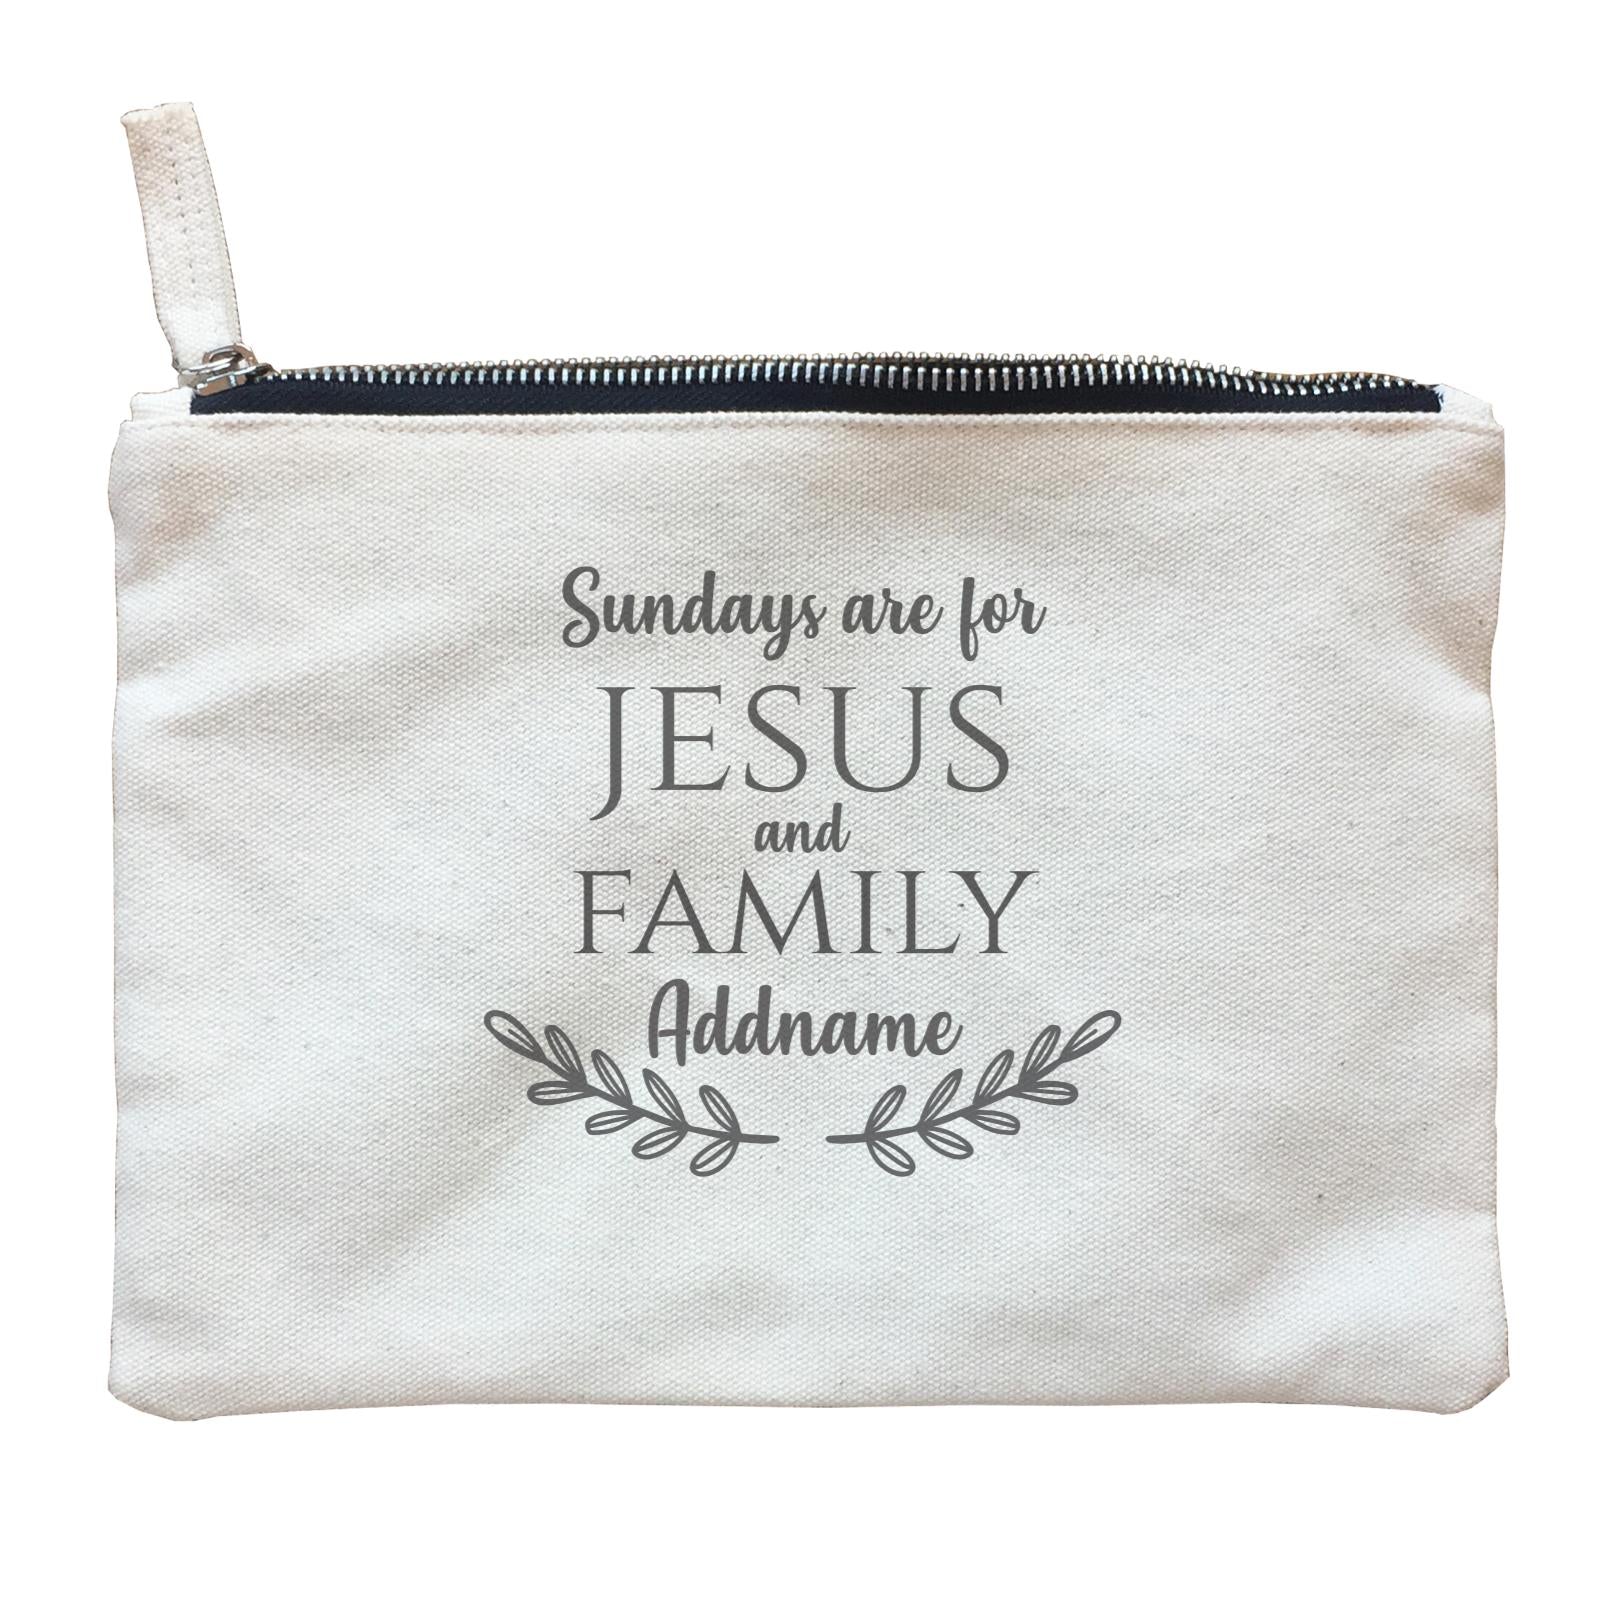 Christian Series Sundays Are For Jesus And Family Addname Zipper Pouch